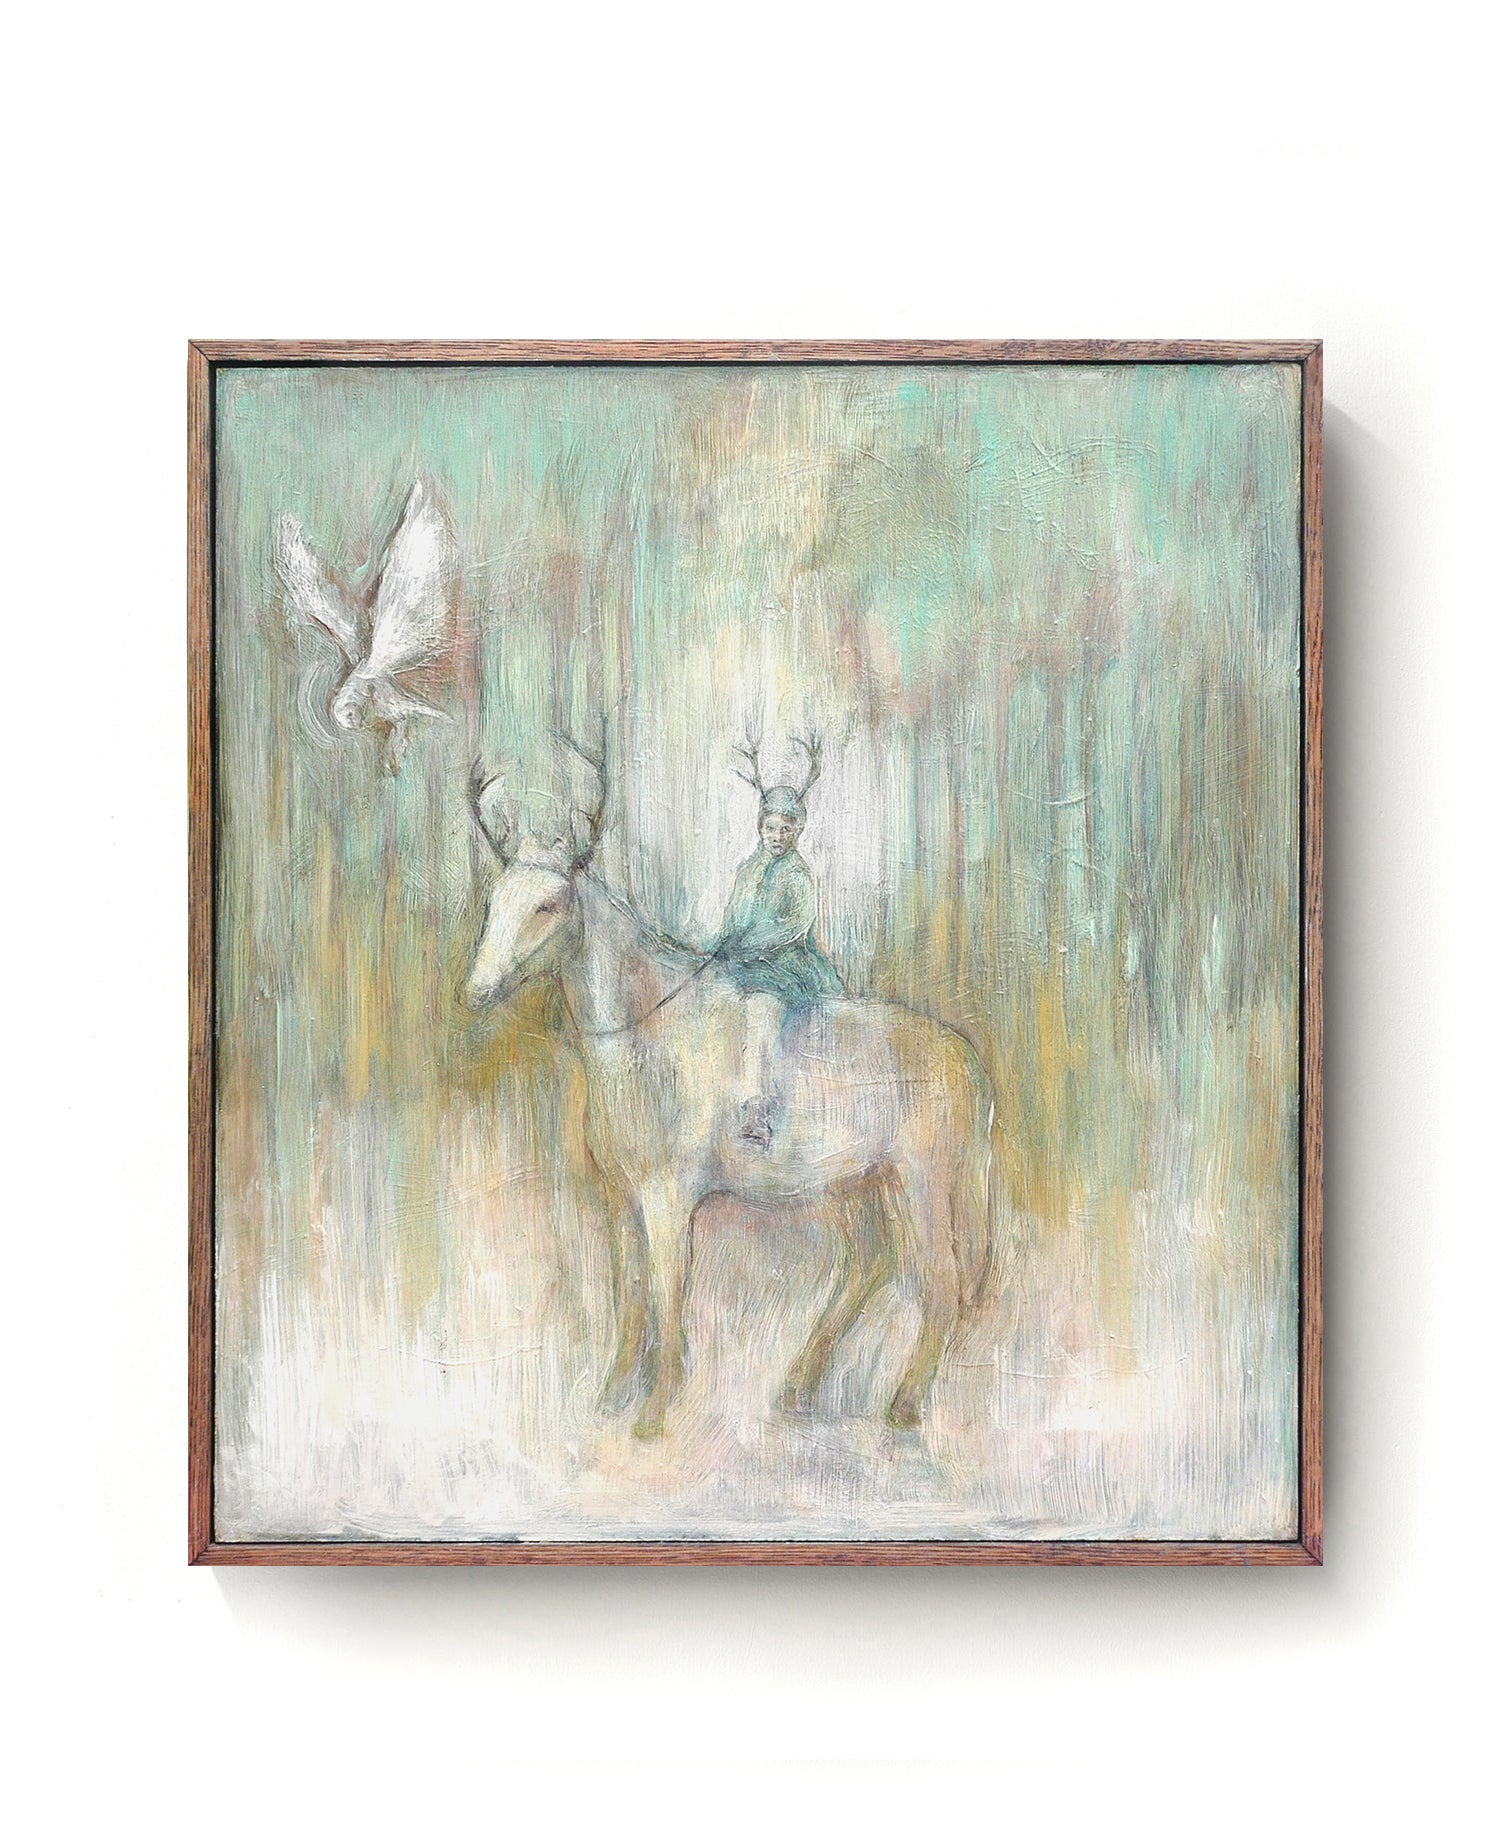 Oil painting on canvas of a child on horseback with an owl in green, blue and pale tones.